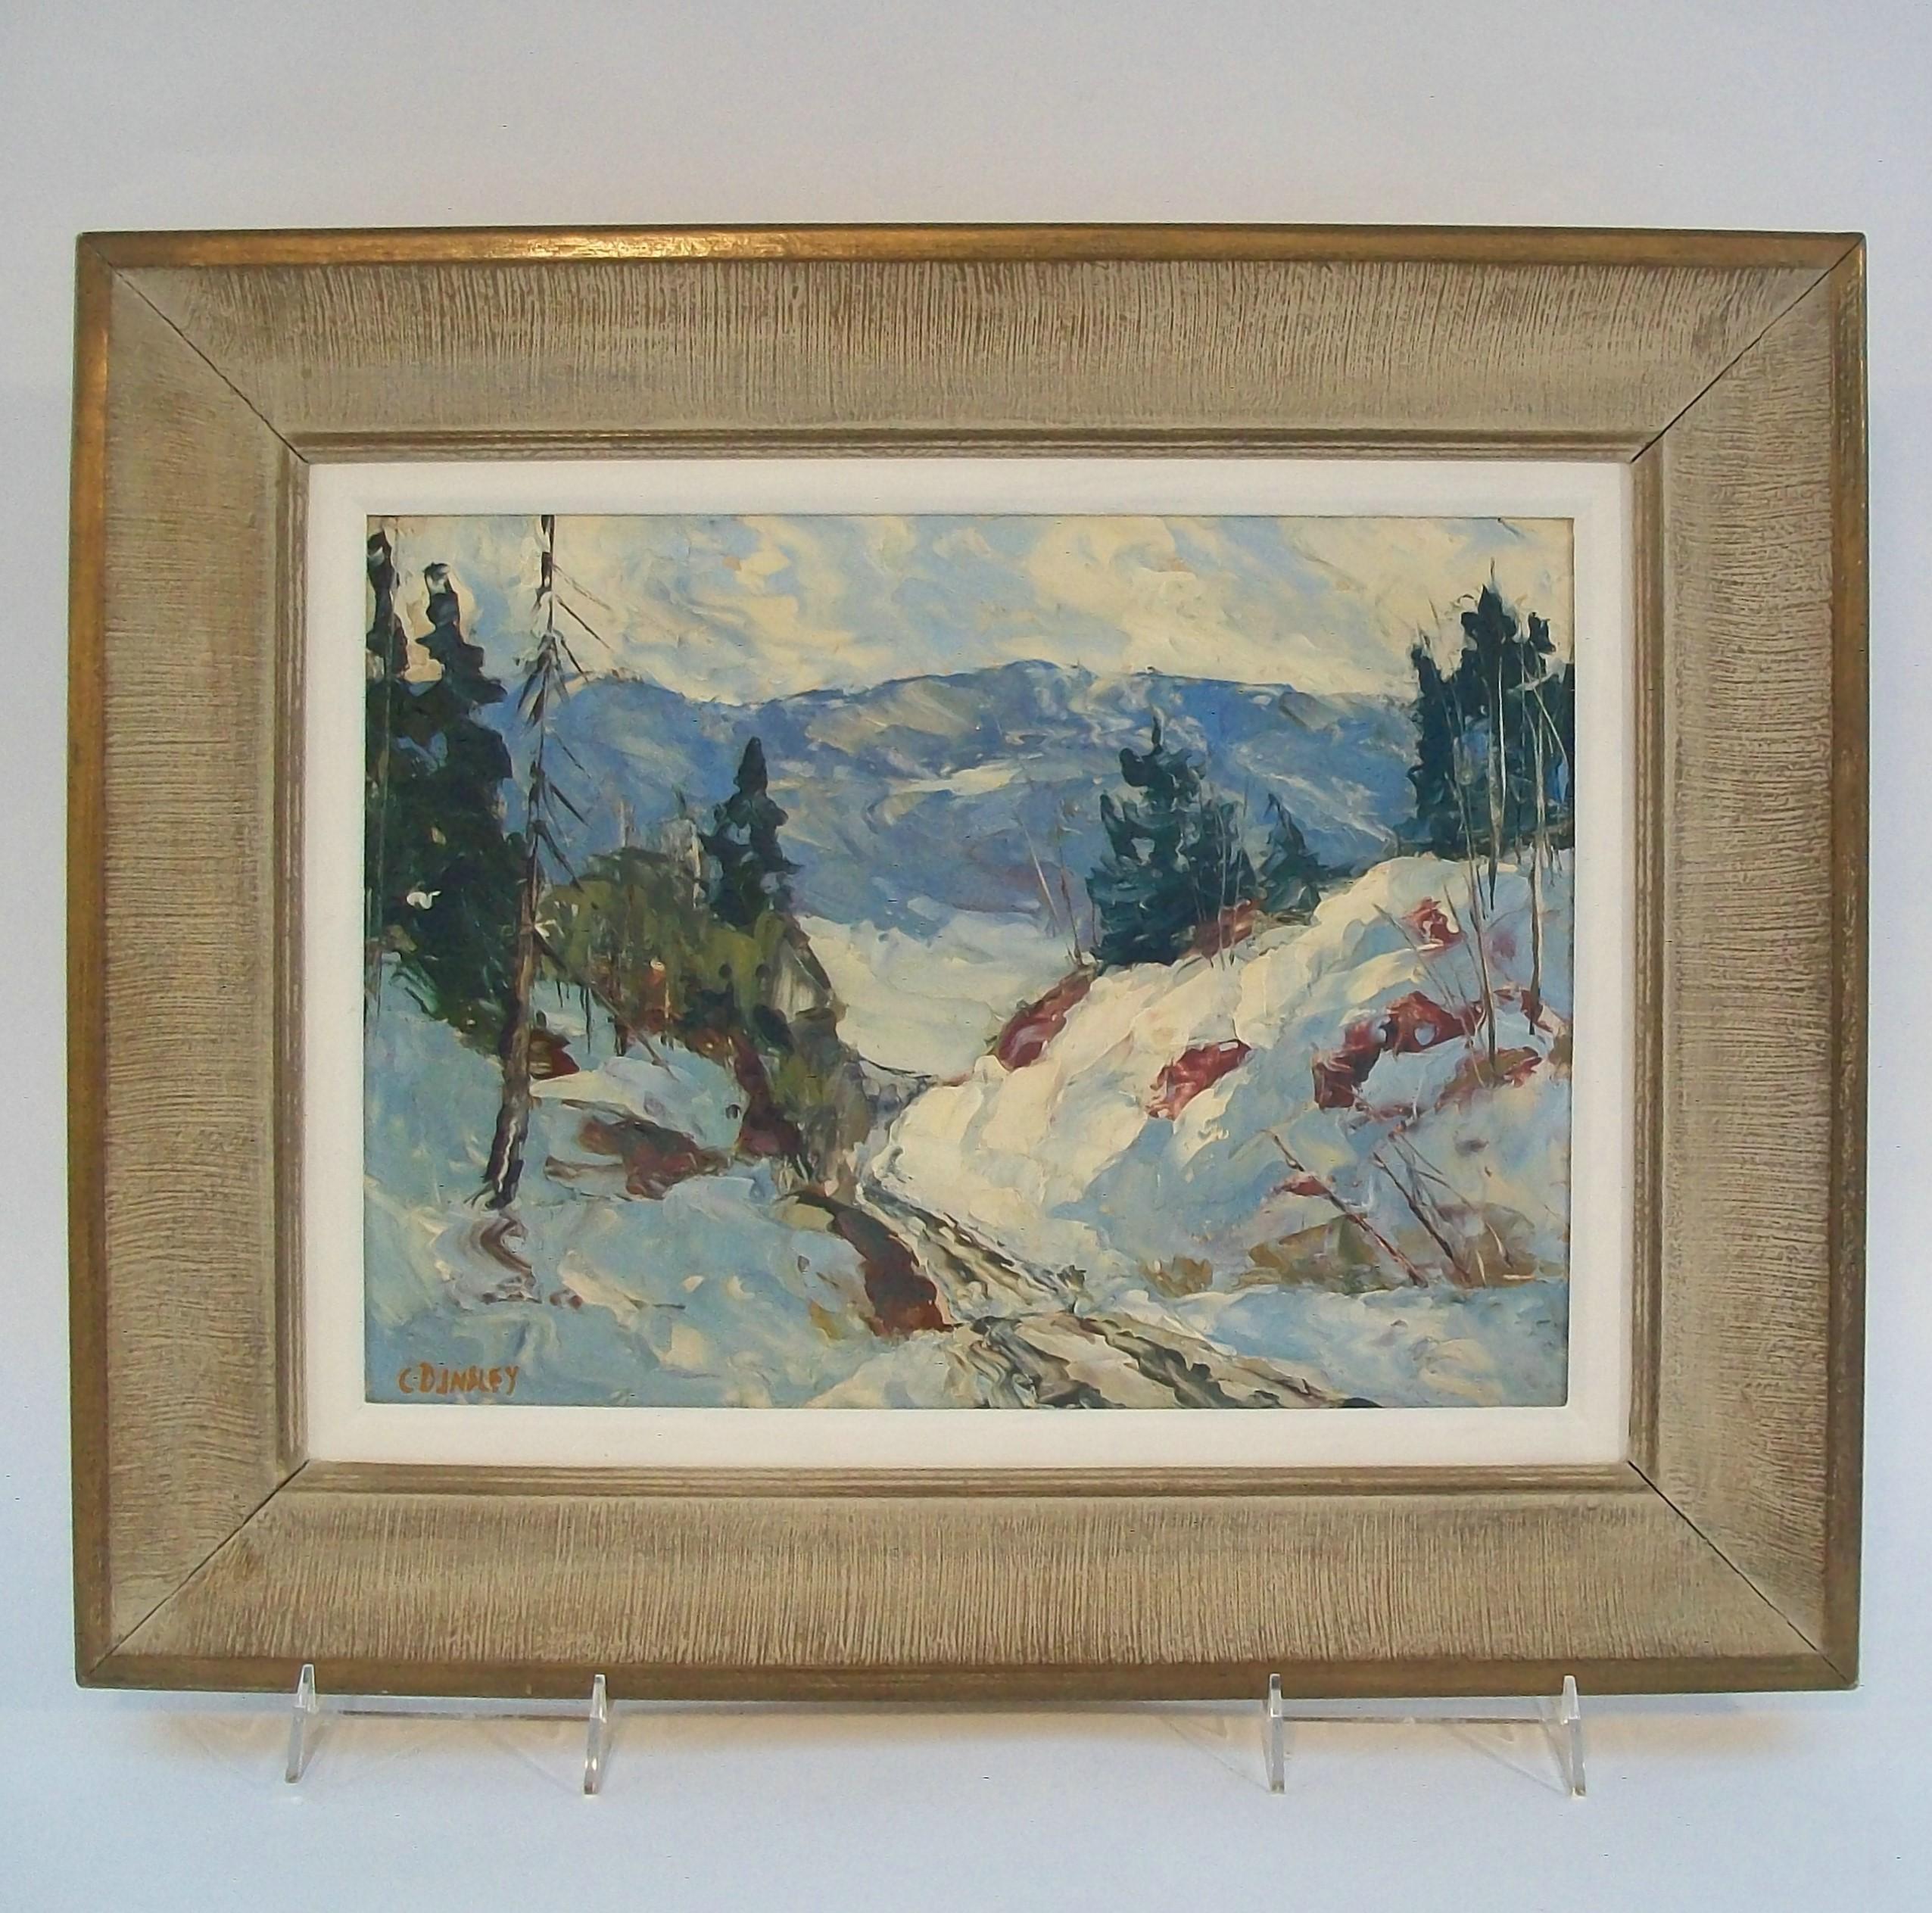 Gilt C. D. INSLEY - 'Late Afternoon Snow' - Framed Oil Painting - Canada - Circa 1960 For Sale